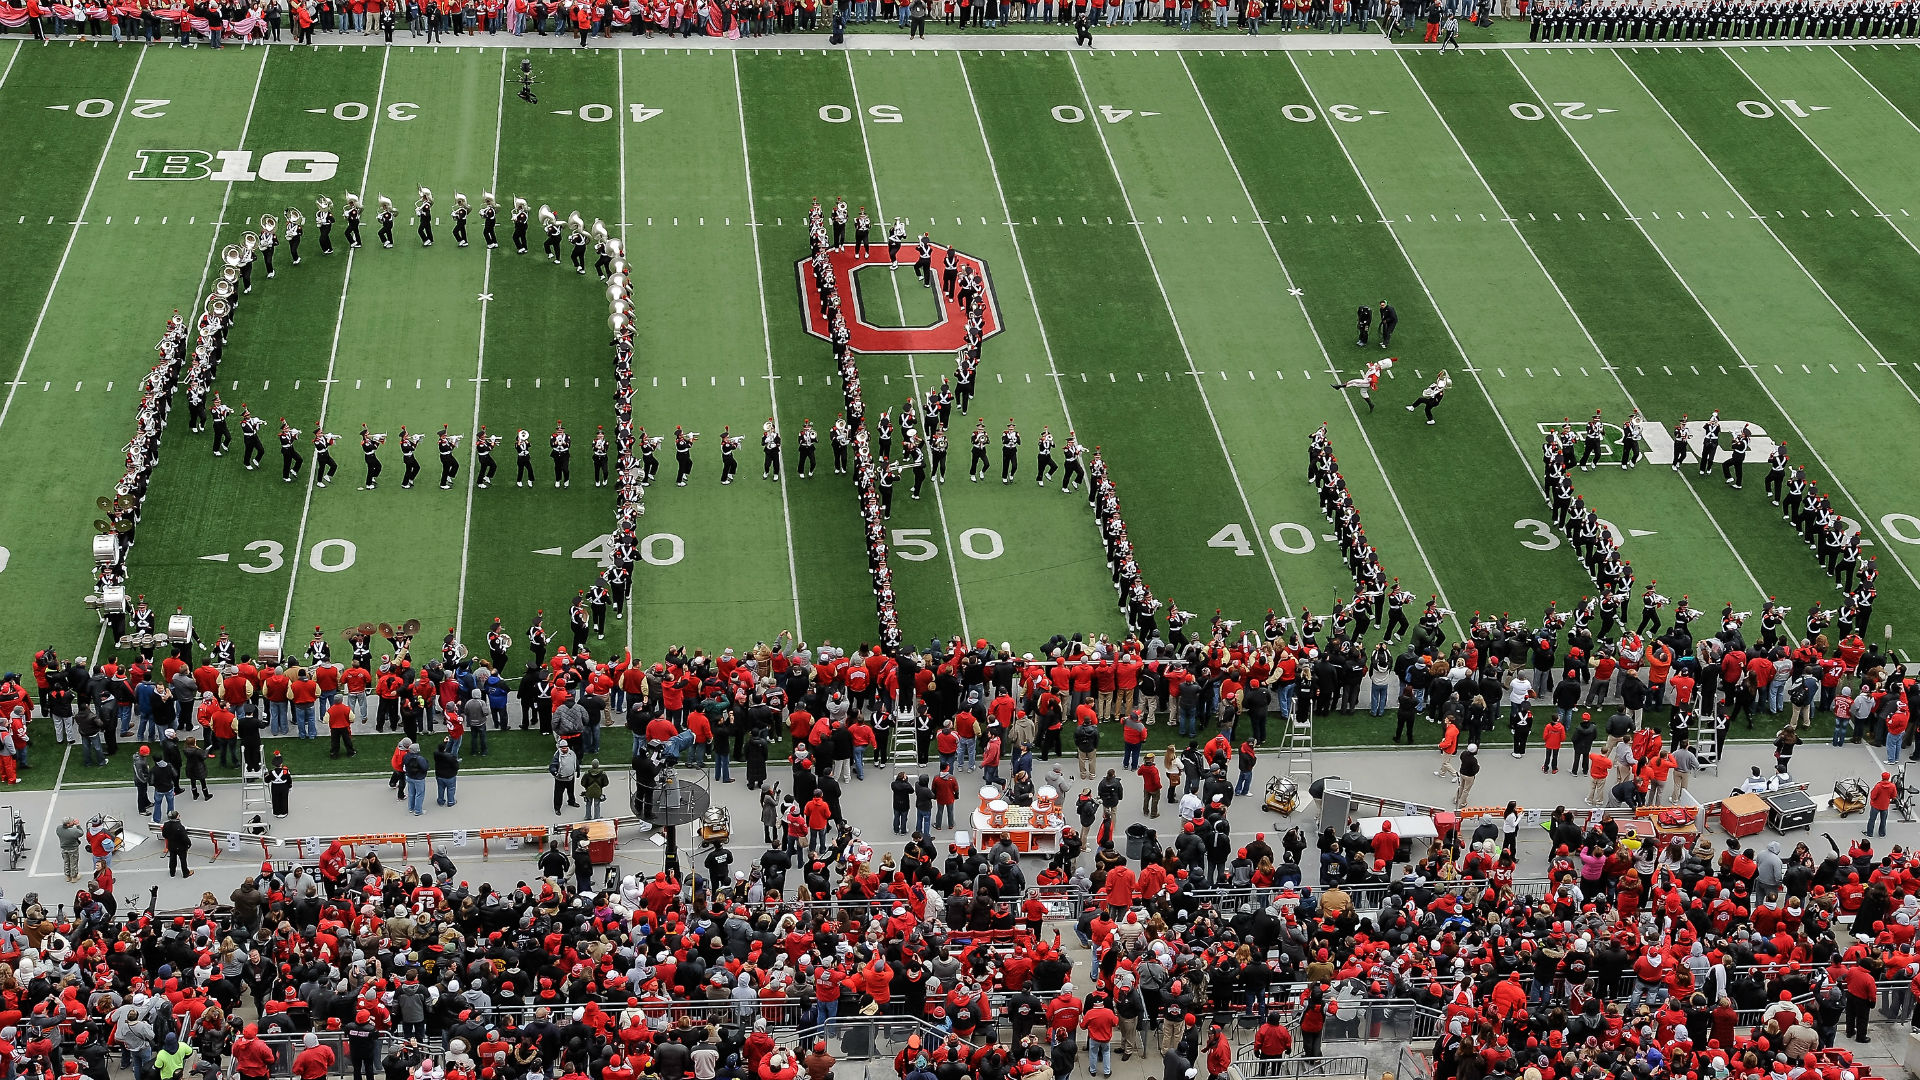 Ohio State marching band songbook reveals horrific song about Holocaust